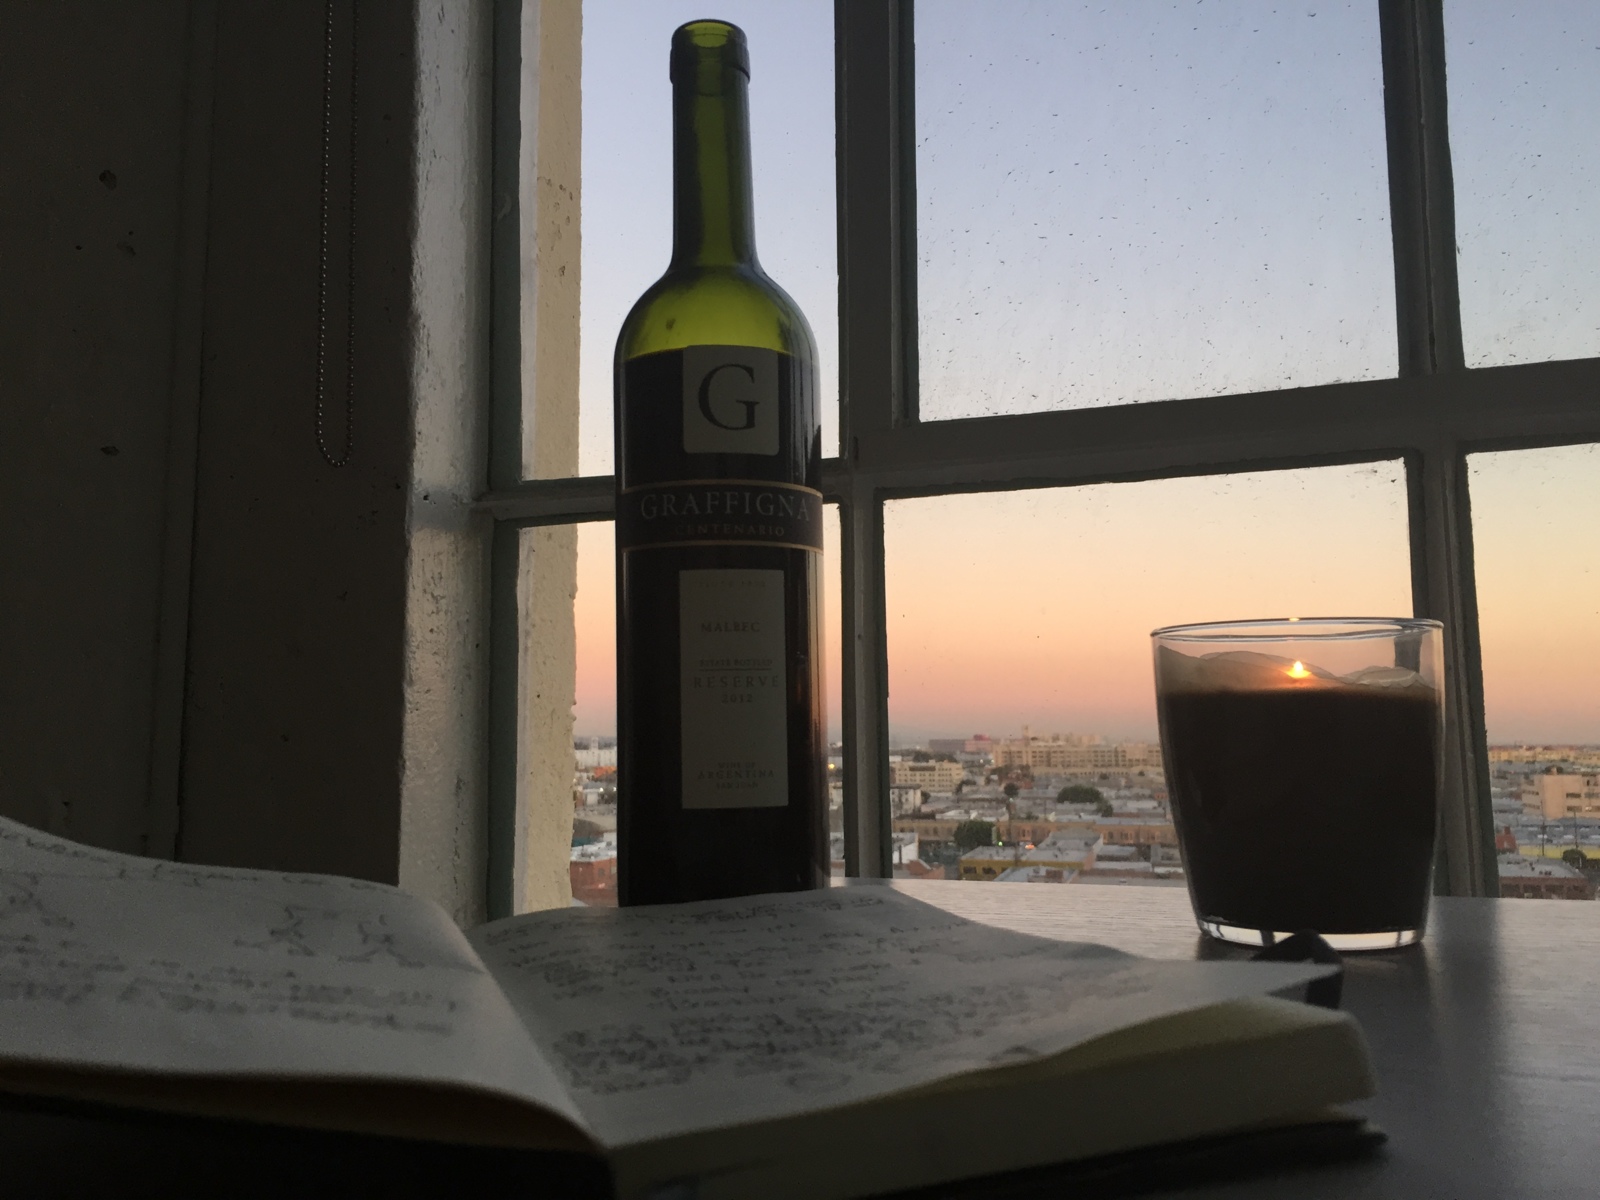 Bottle of Graffigna wine with opened notepad with notes and glass of coffee nearby looking out window at sun rising